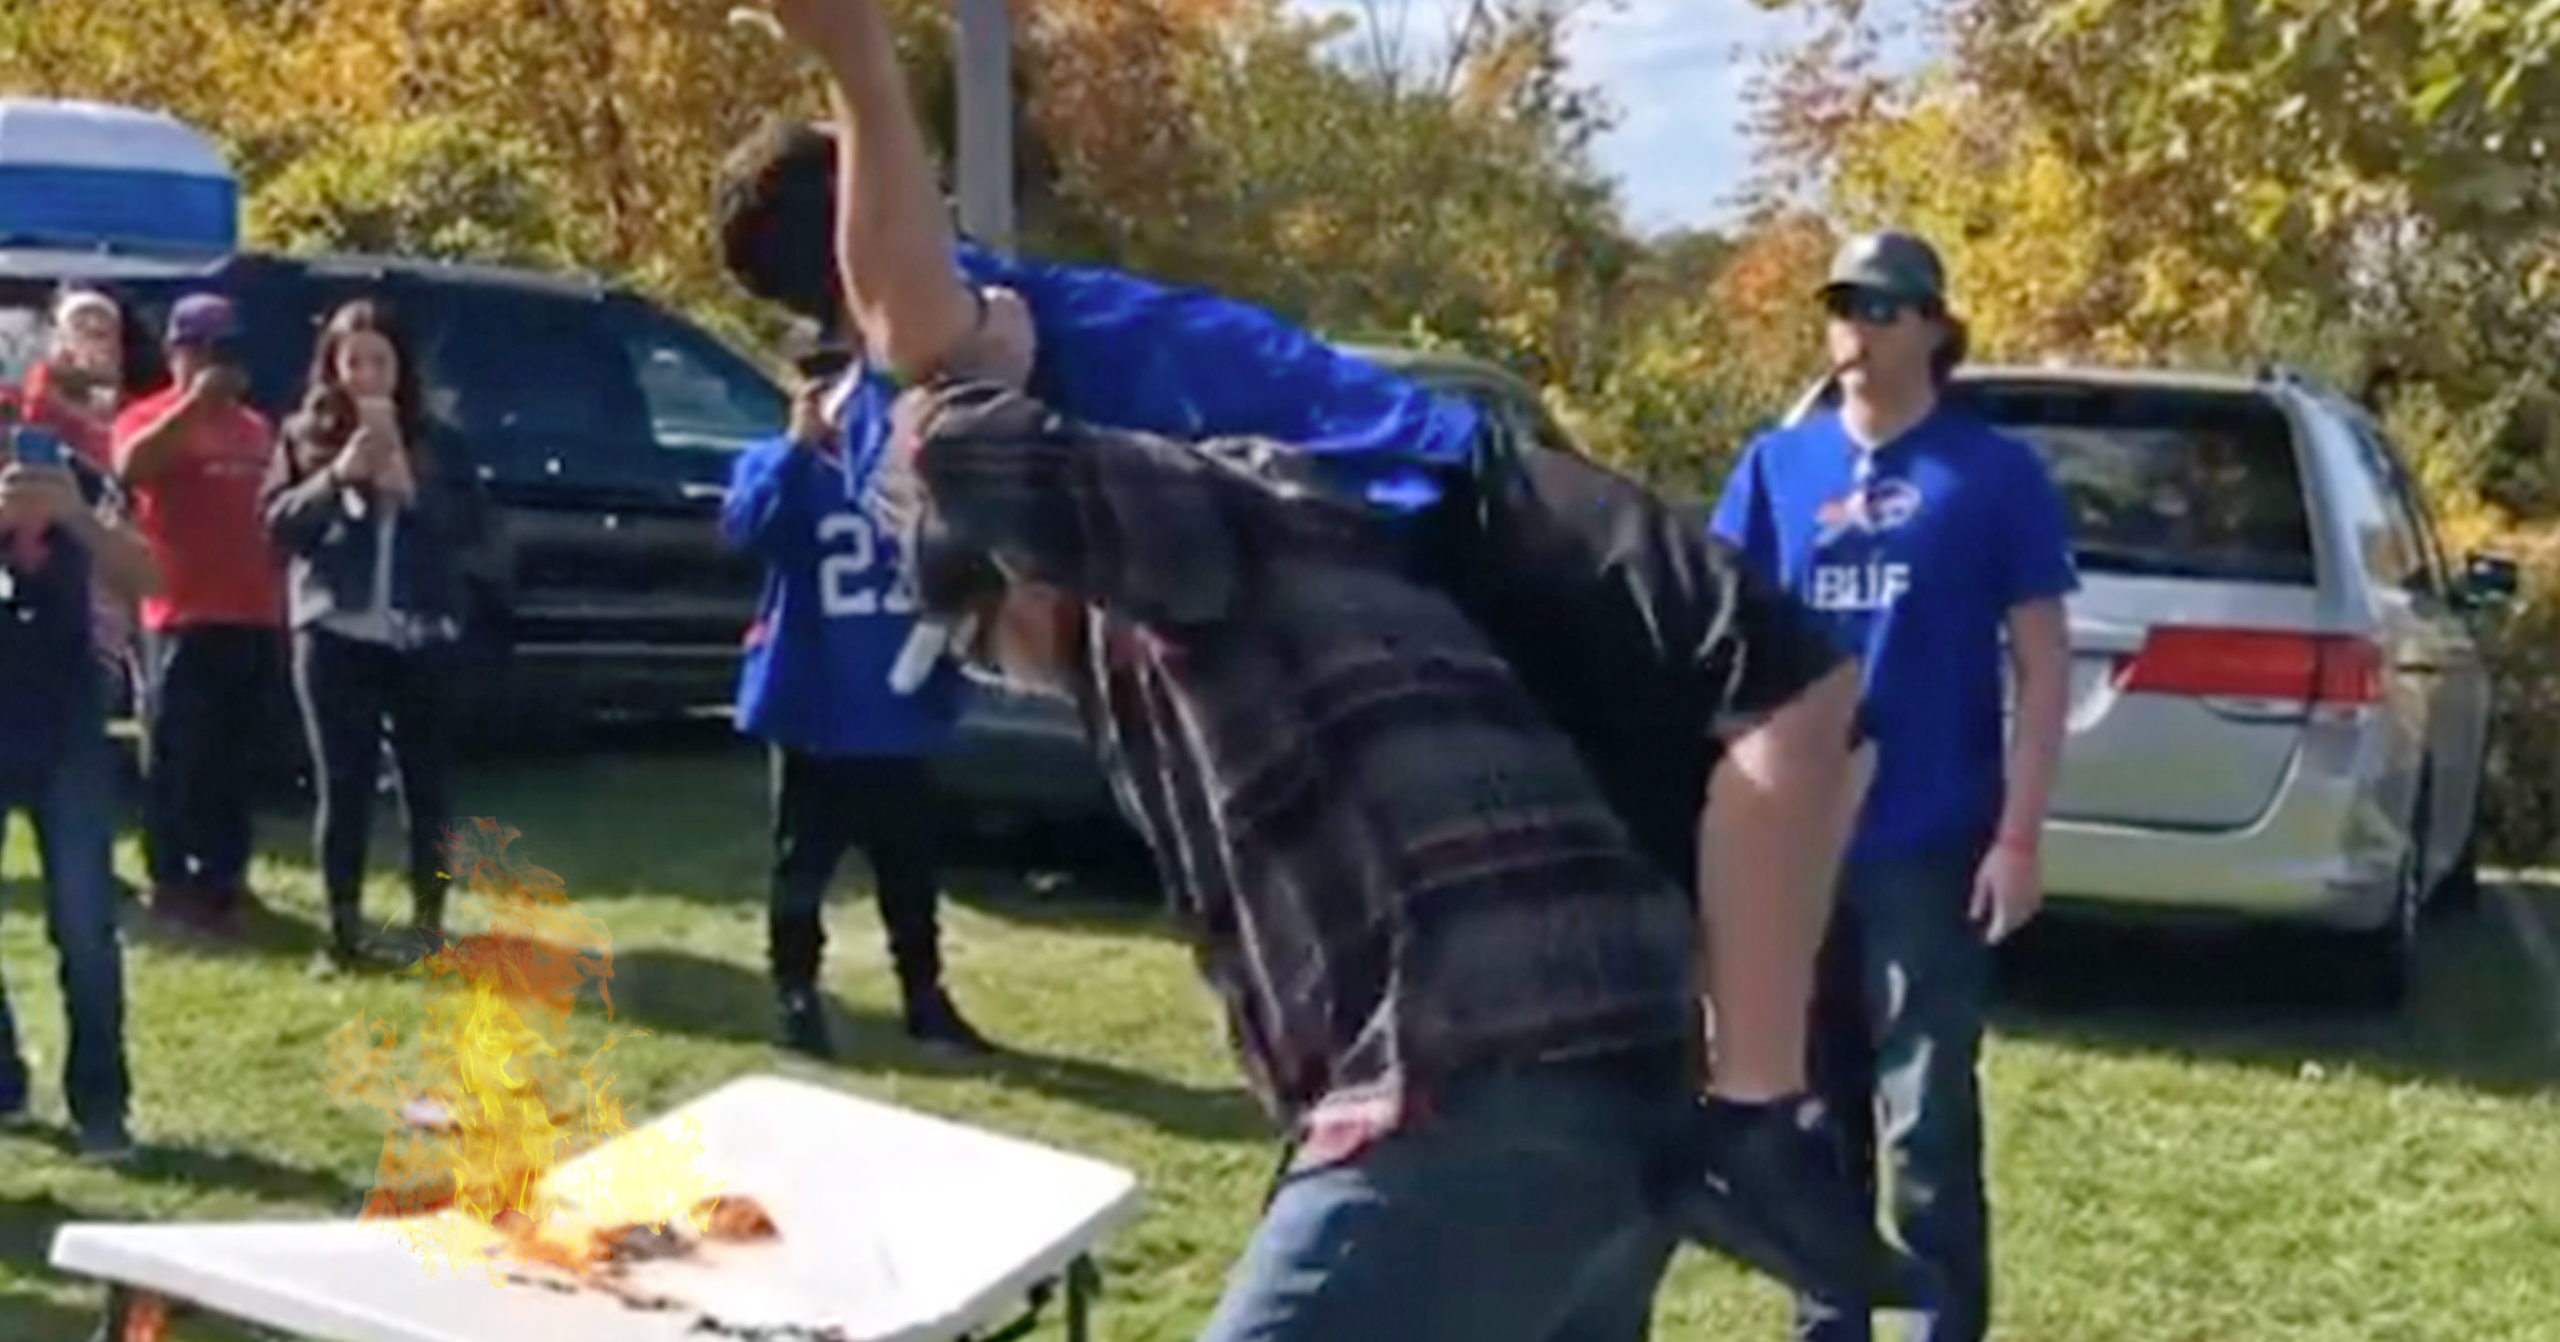 Bills Fan Catches On Fire After Being Thrown Wwe Style Into Burning Table Video